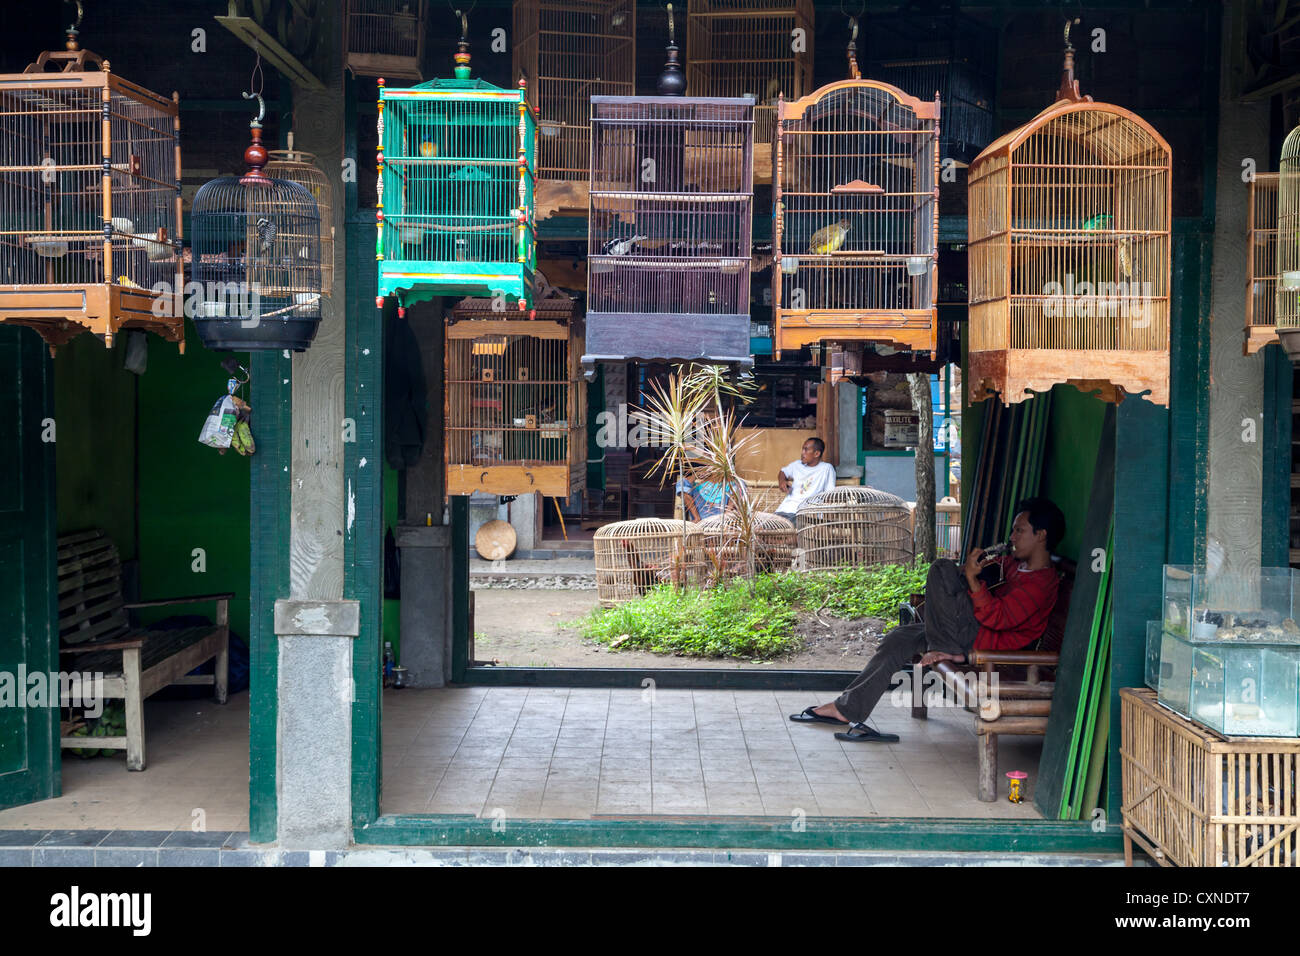 Bird Cages on the Bird Market in Indonesia Stock Photo